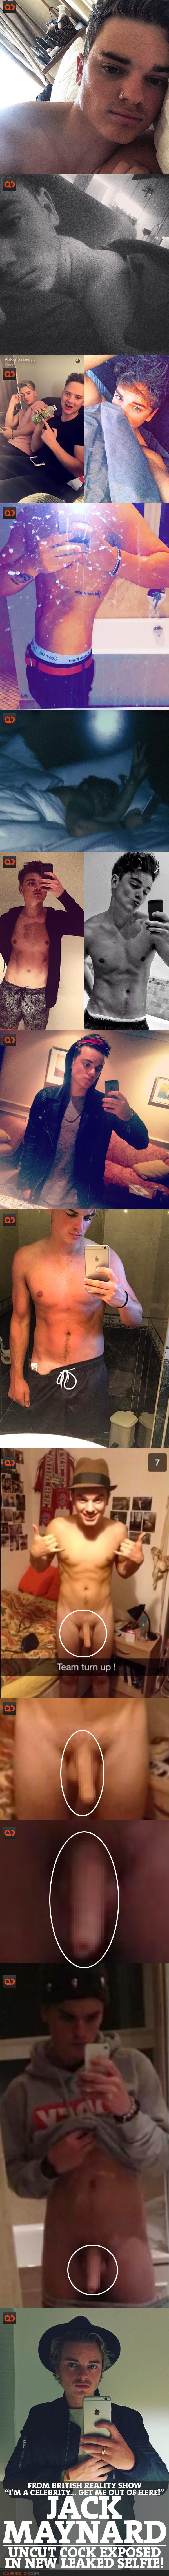 Jack Maynard, From British Reality Show “I'm A Celebrity… Get Me Out Of Here!”, Uncut Cock Exposed In Leaked Selfie!